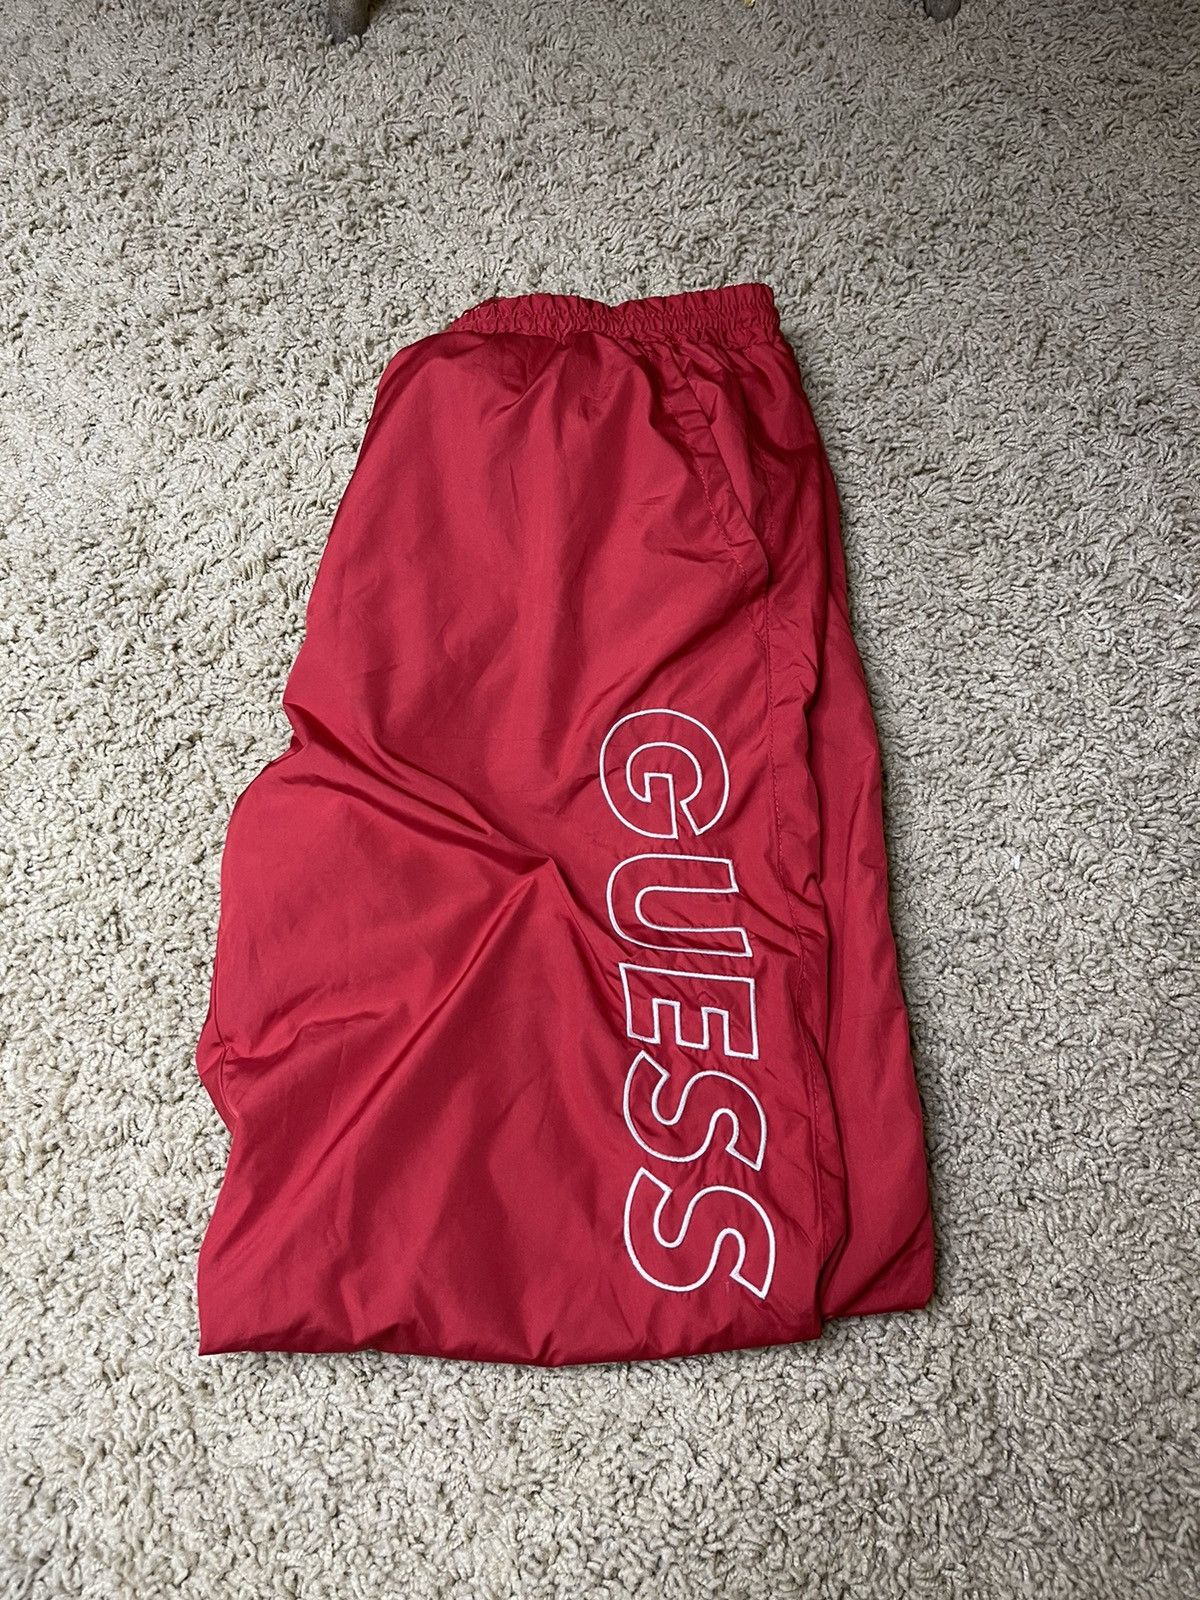 Guess Red GUESS tracksuit pant Size US 32 / EU 48 - 5 Preview